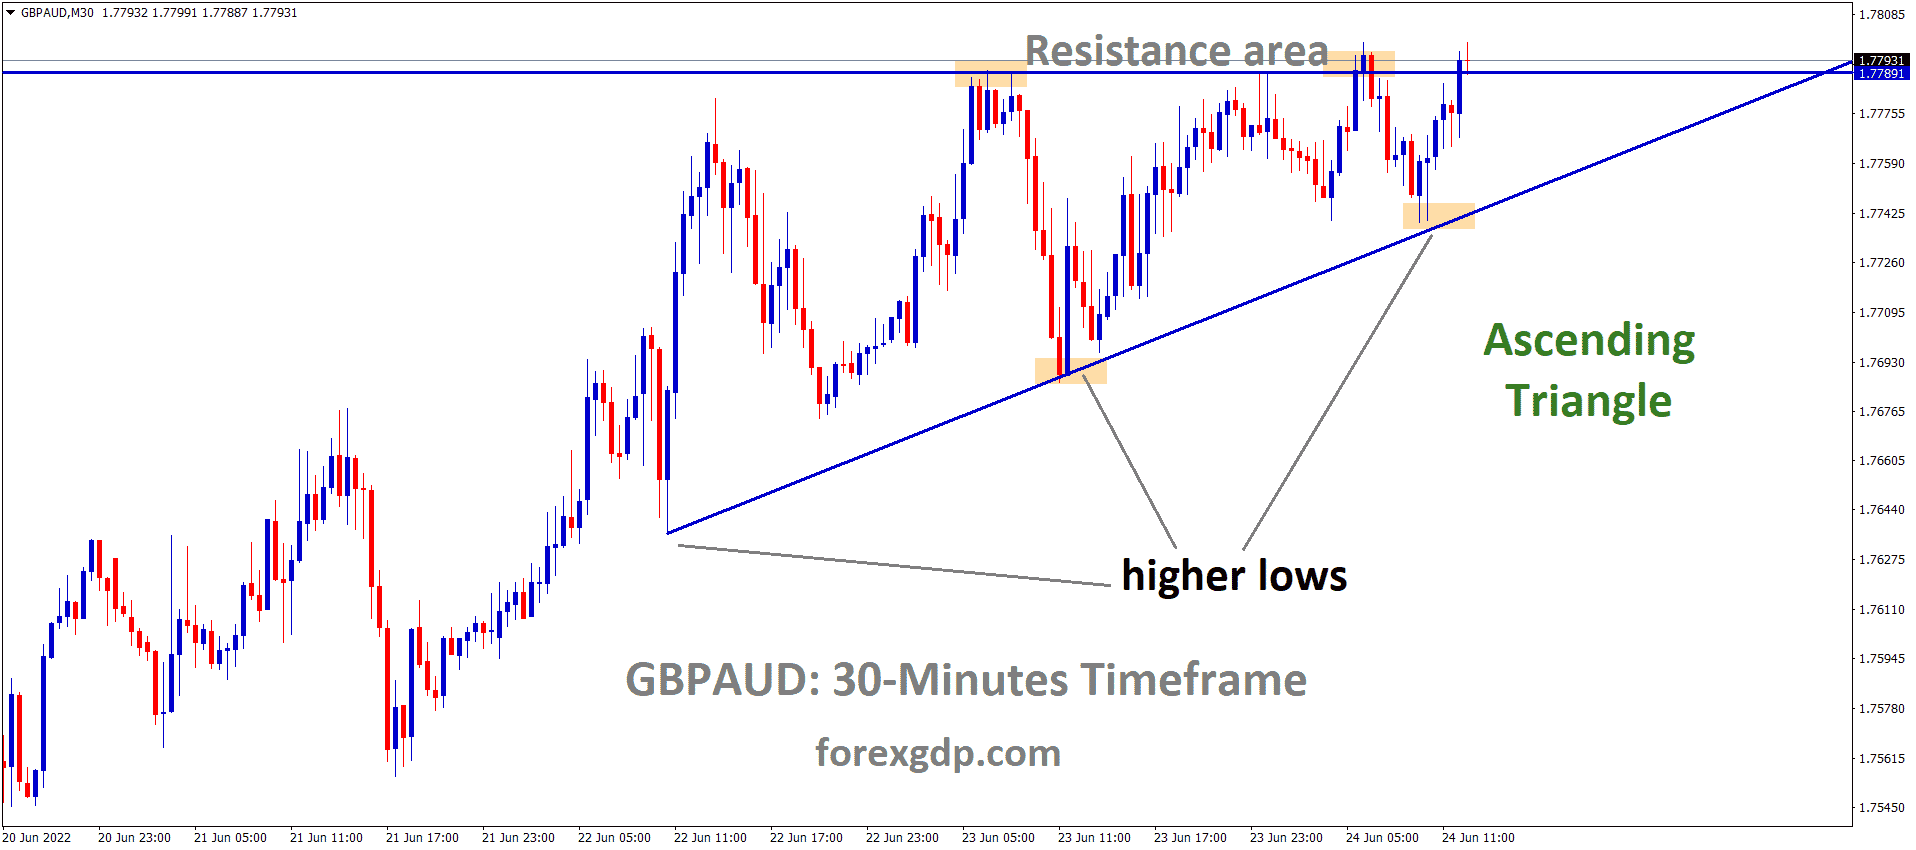 GBPAUD is moving in an Ascending triangle pattern and the market has reached the Horizontal resistance area of the Pattern